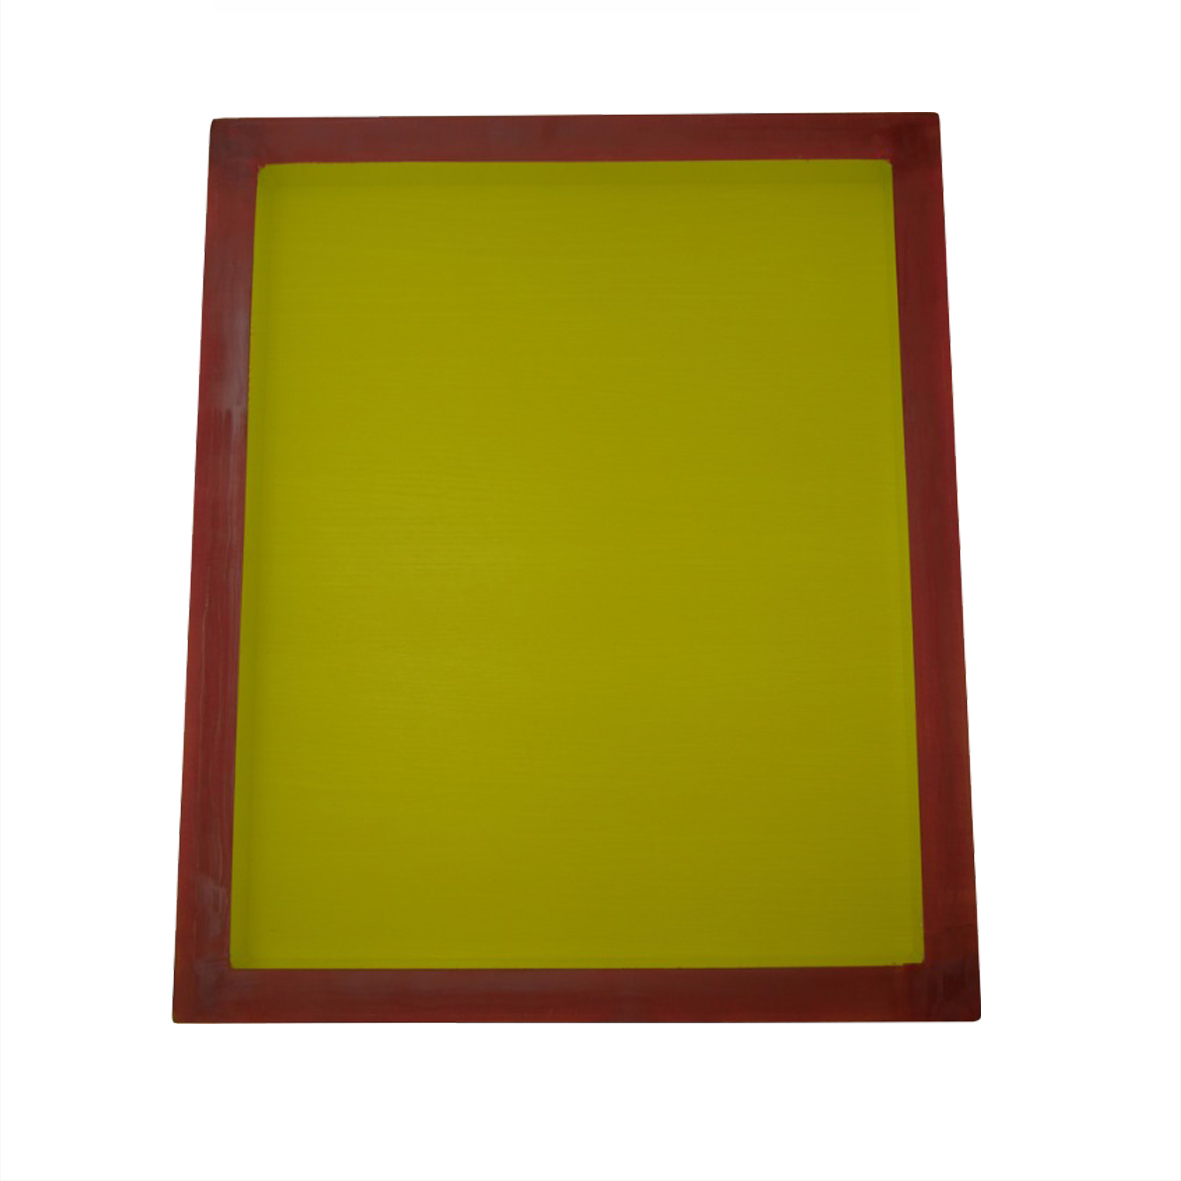 25x36inch screen printing frame with mesh